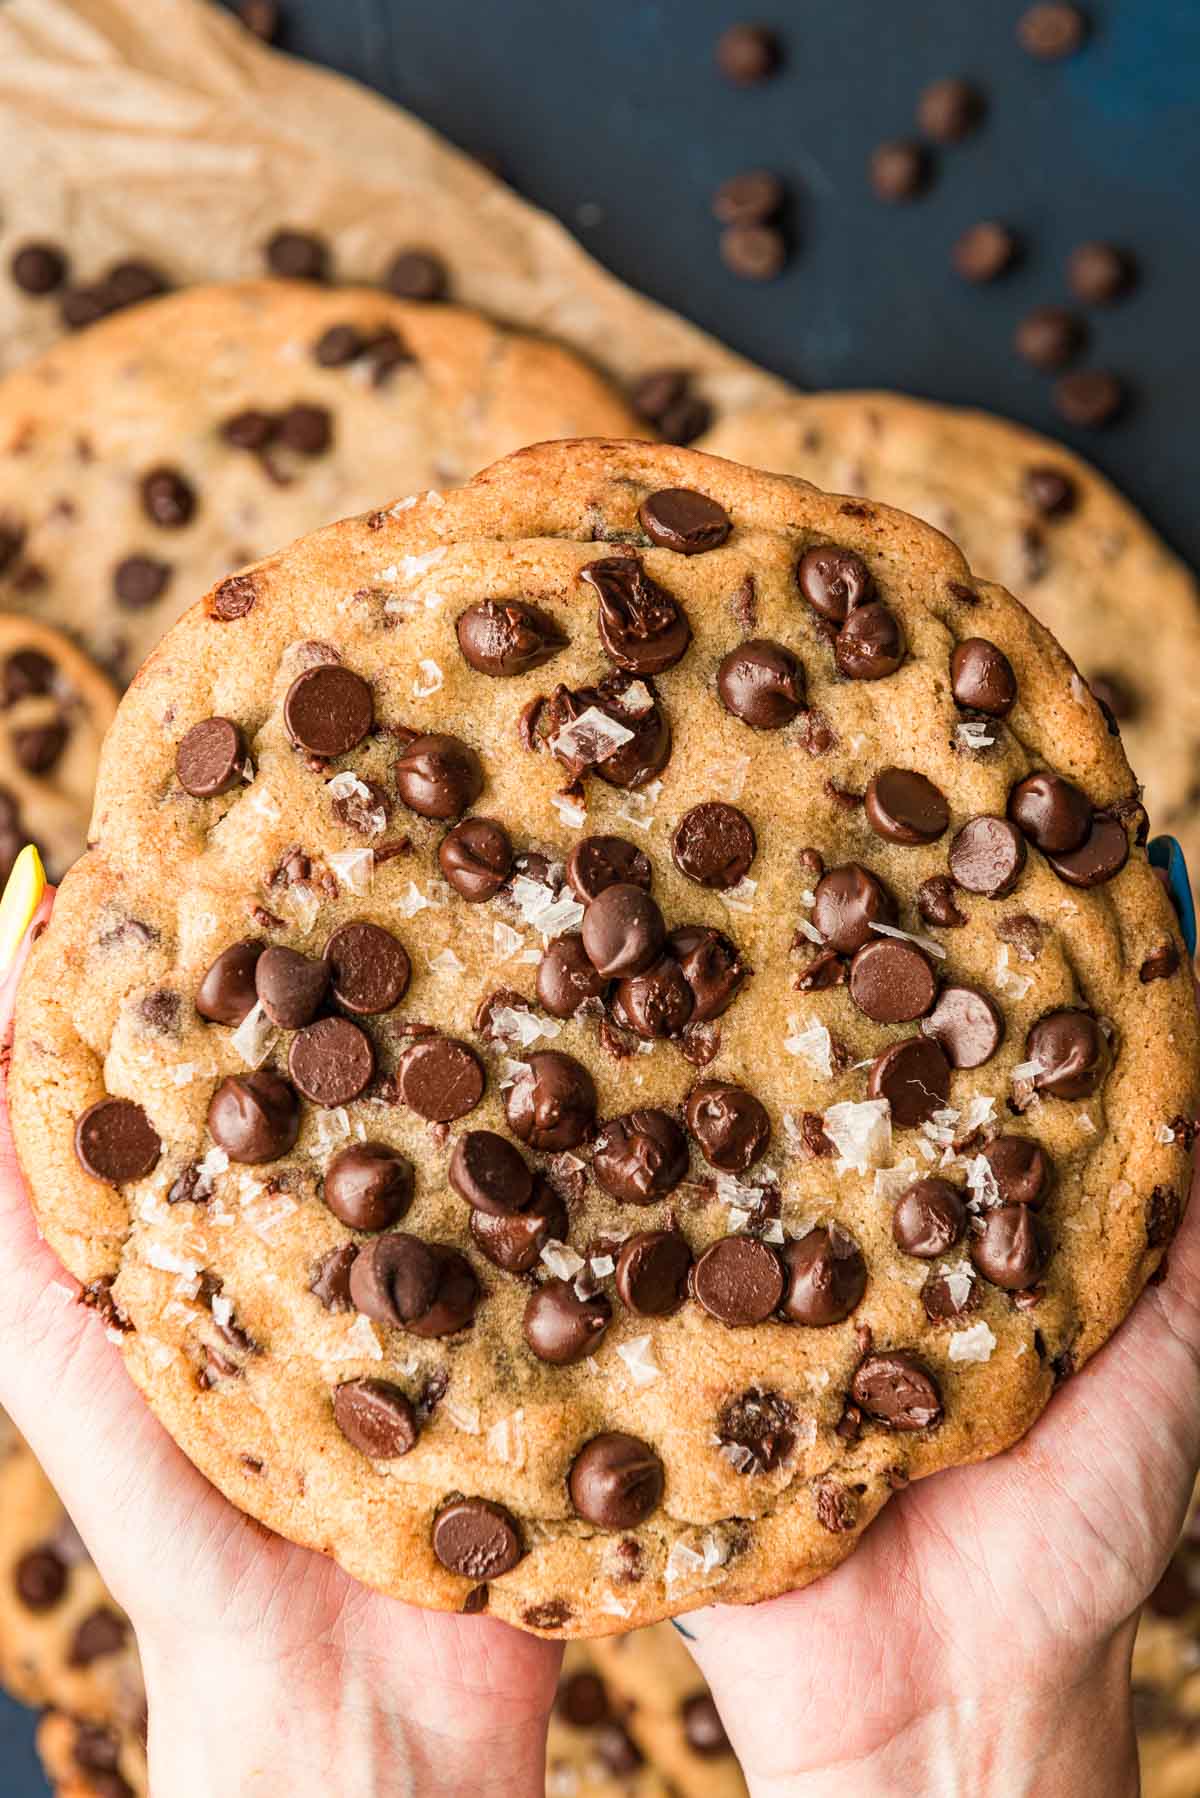 https://www.sugarandsoul.co/wp-content/uploads/2022/03/giant-chocolate-chip-cookies-15.jpg